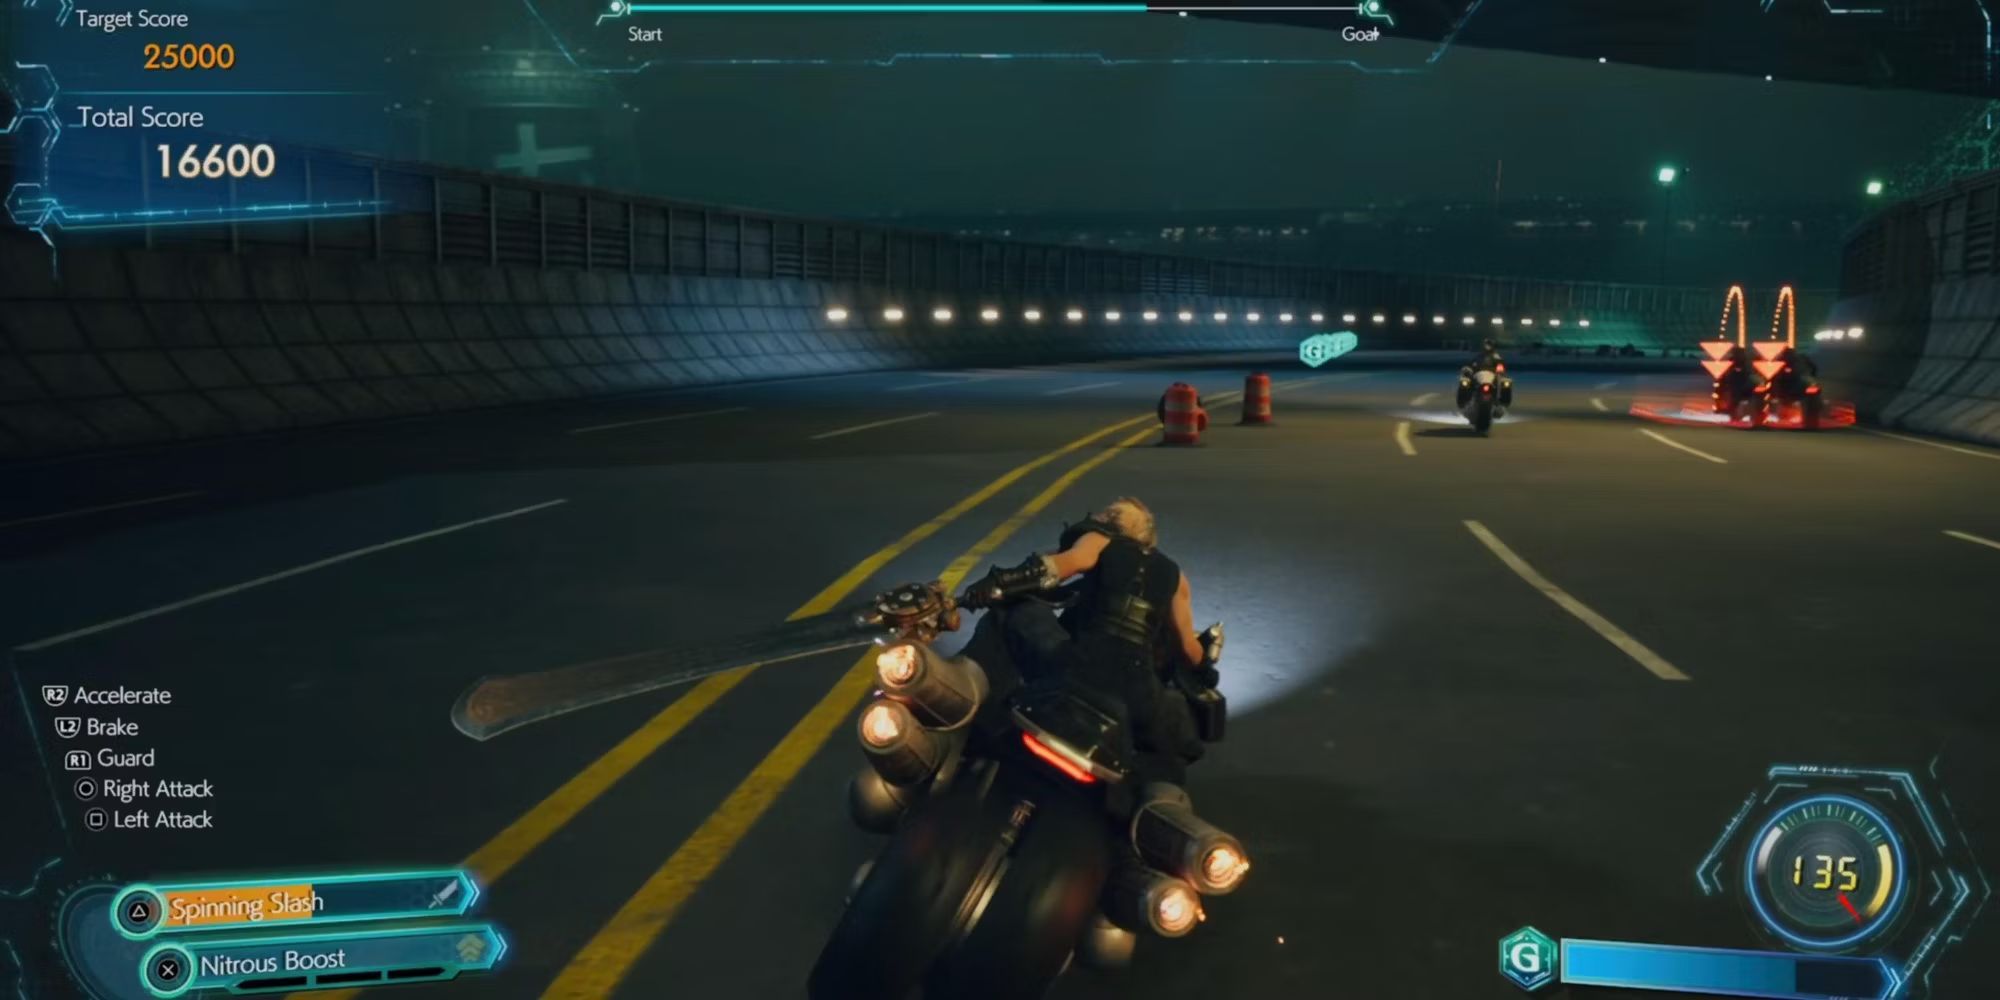 Screenshot from Final Fantasy 7 Rebirth of Cloud riding a motocycle on the highway within the G-Bike mini-game.